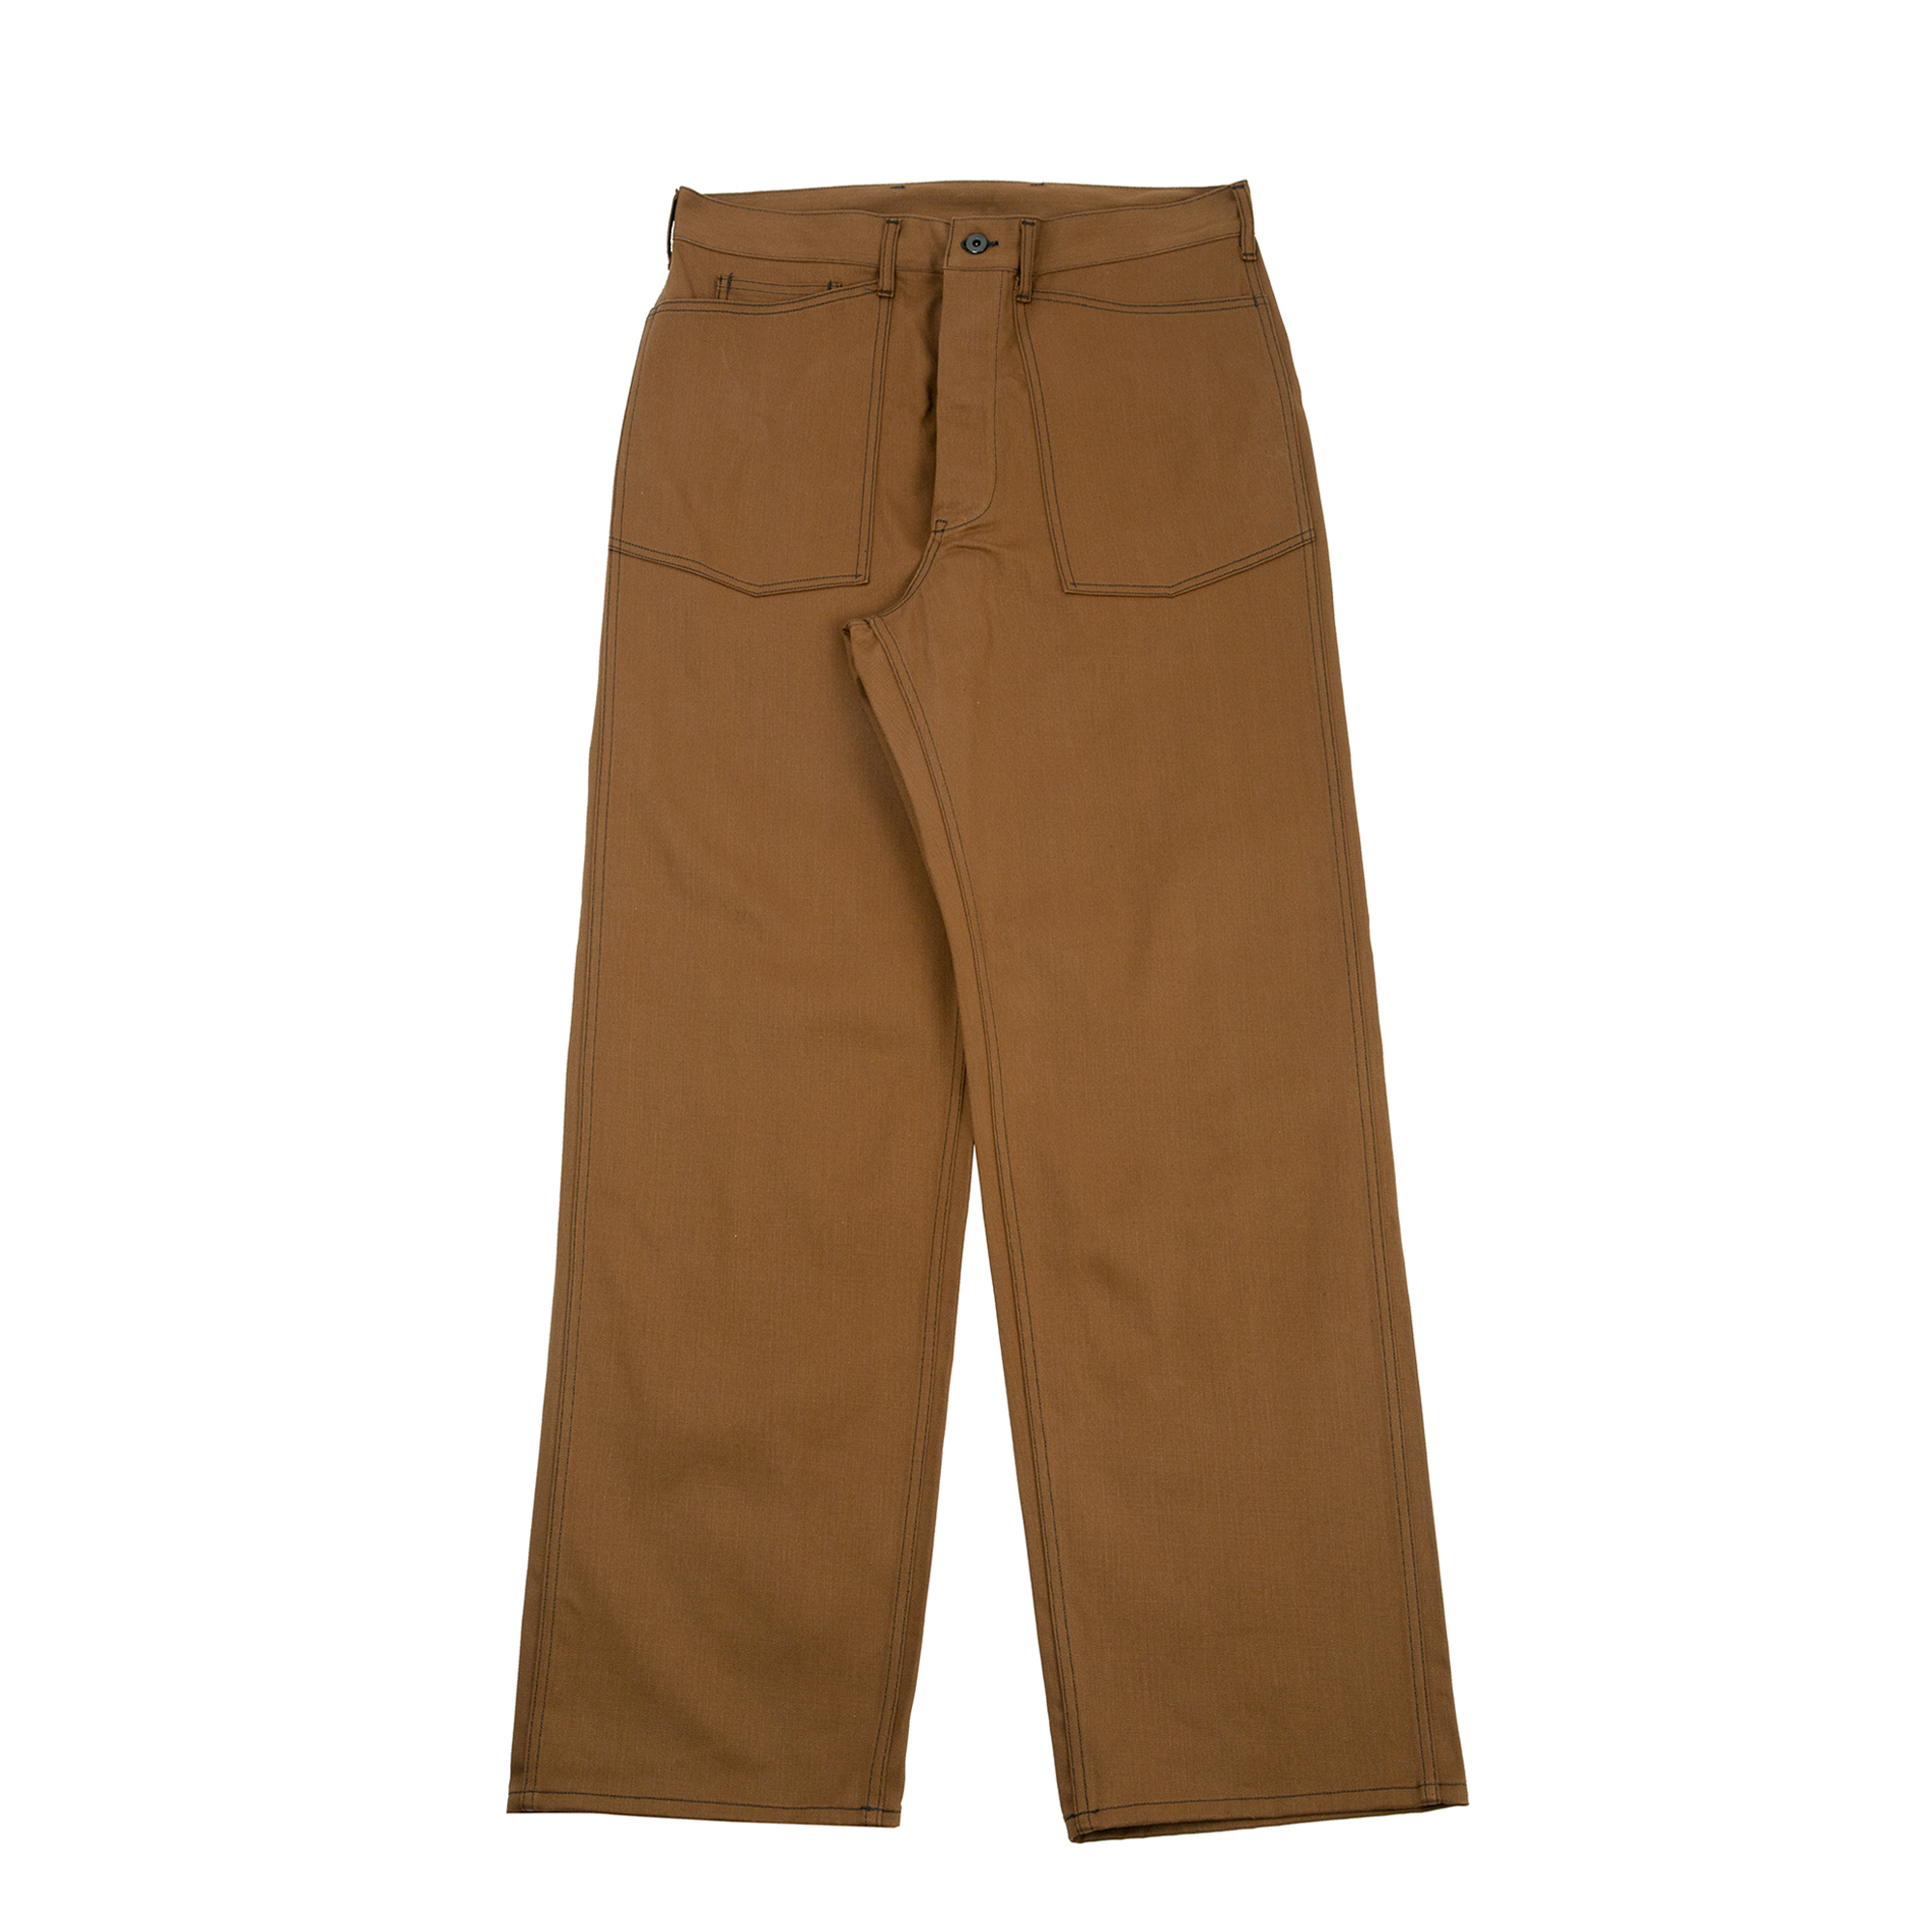 The Real McCoy's - WW1 Brown Fatigue Trousers (Brown)